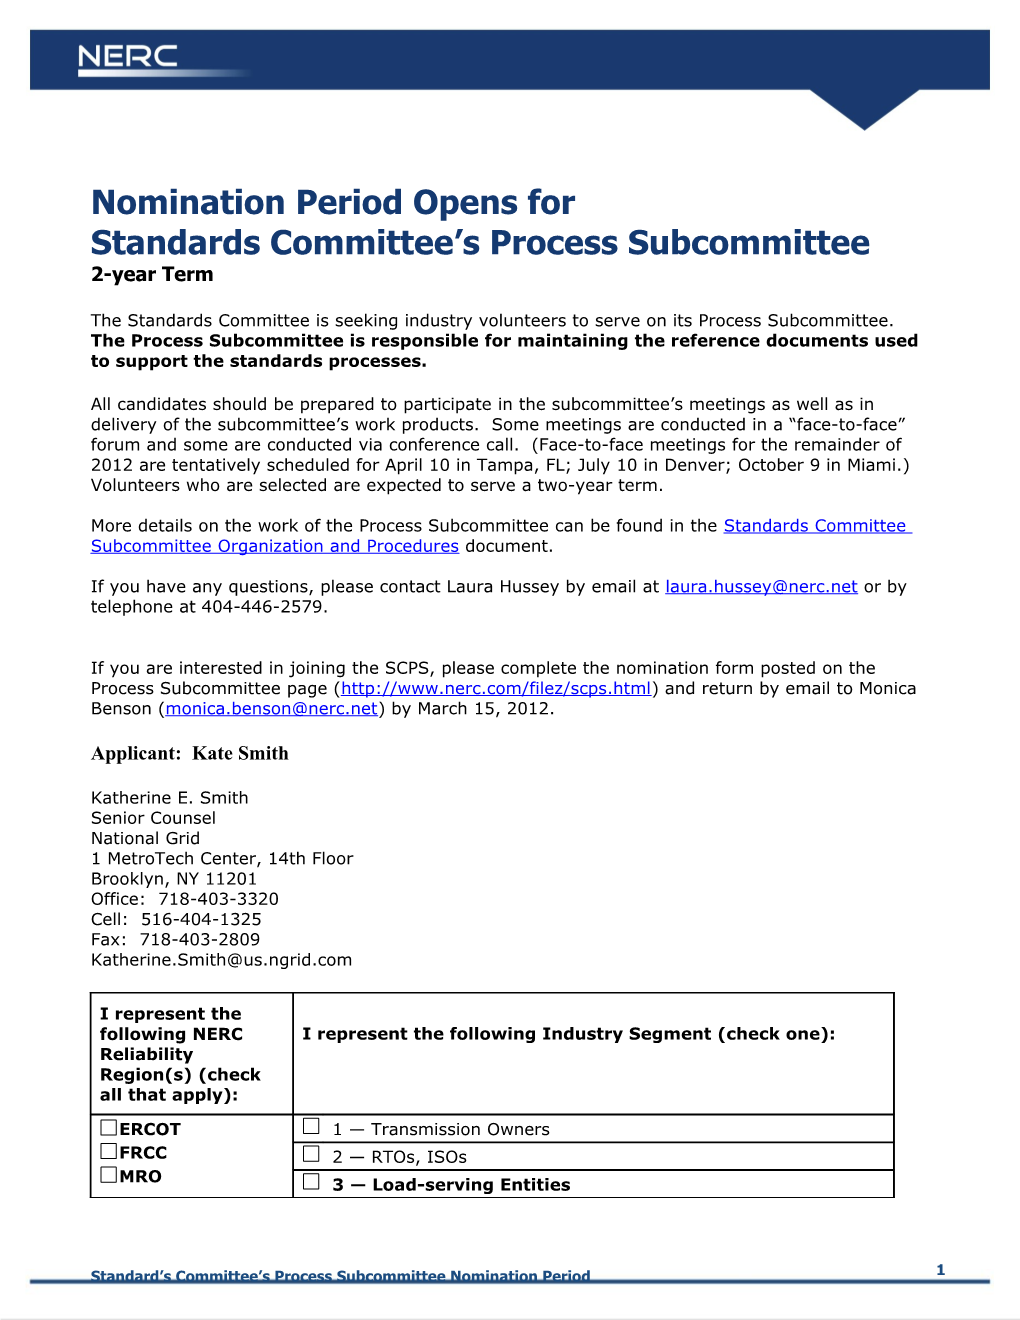 Nomination Period Opens For